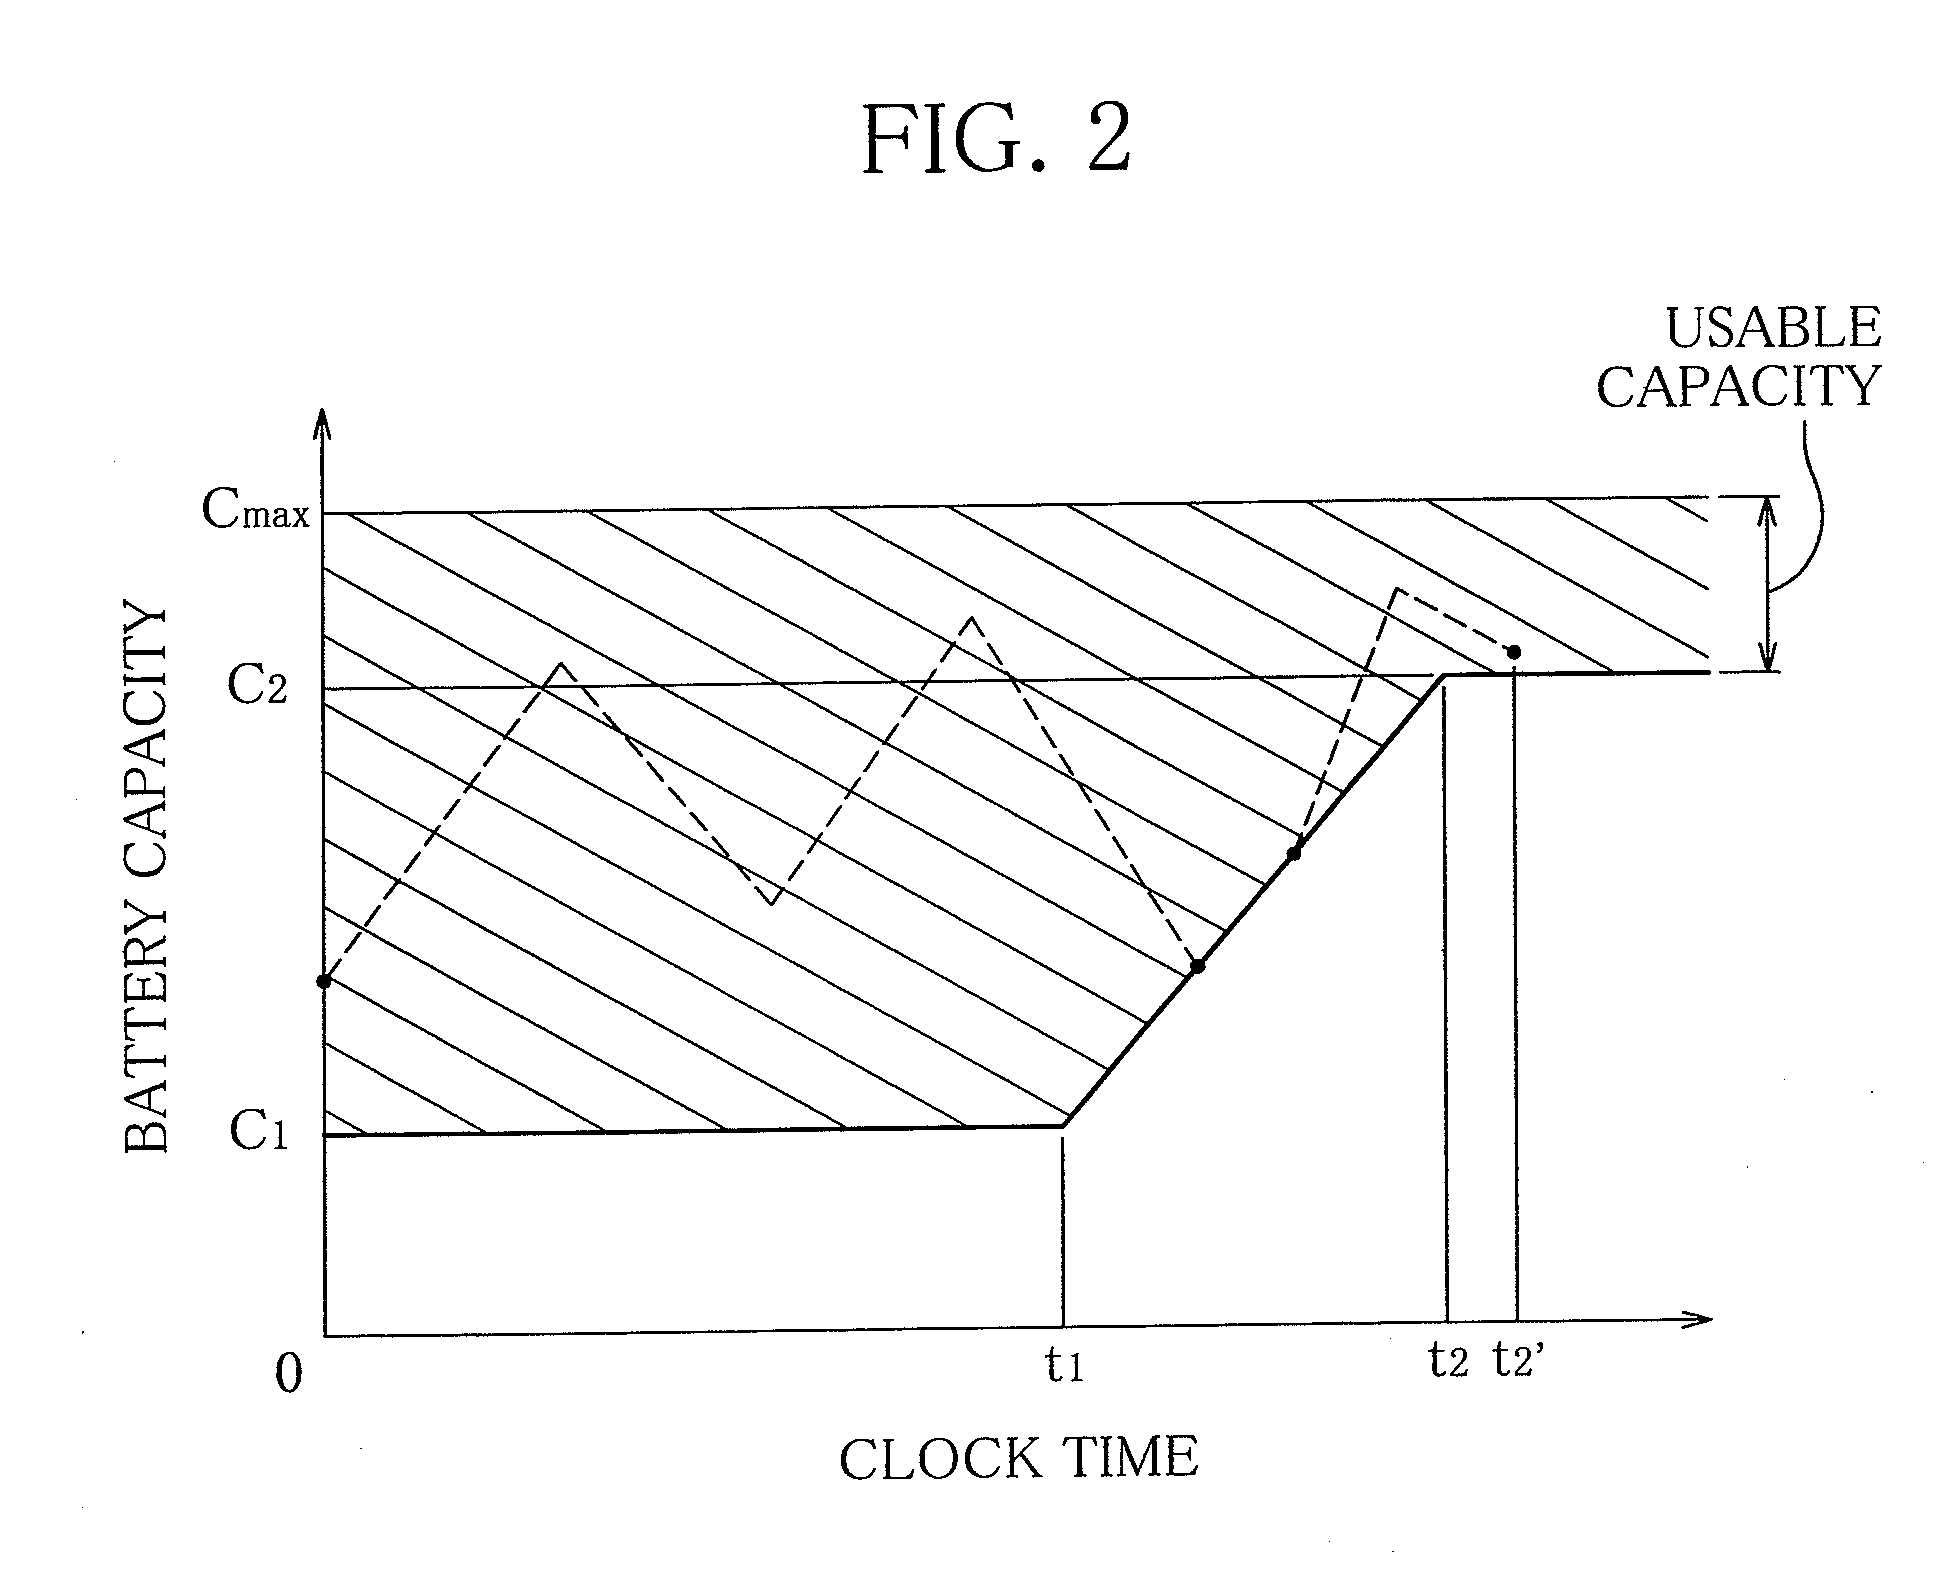 Battery information output equipment for power supply and demand leveling system